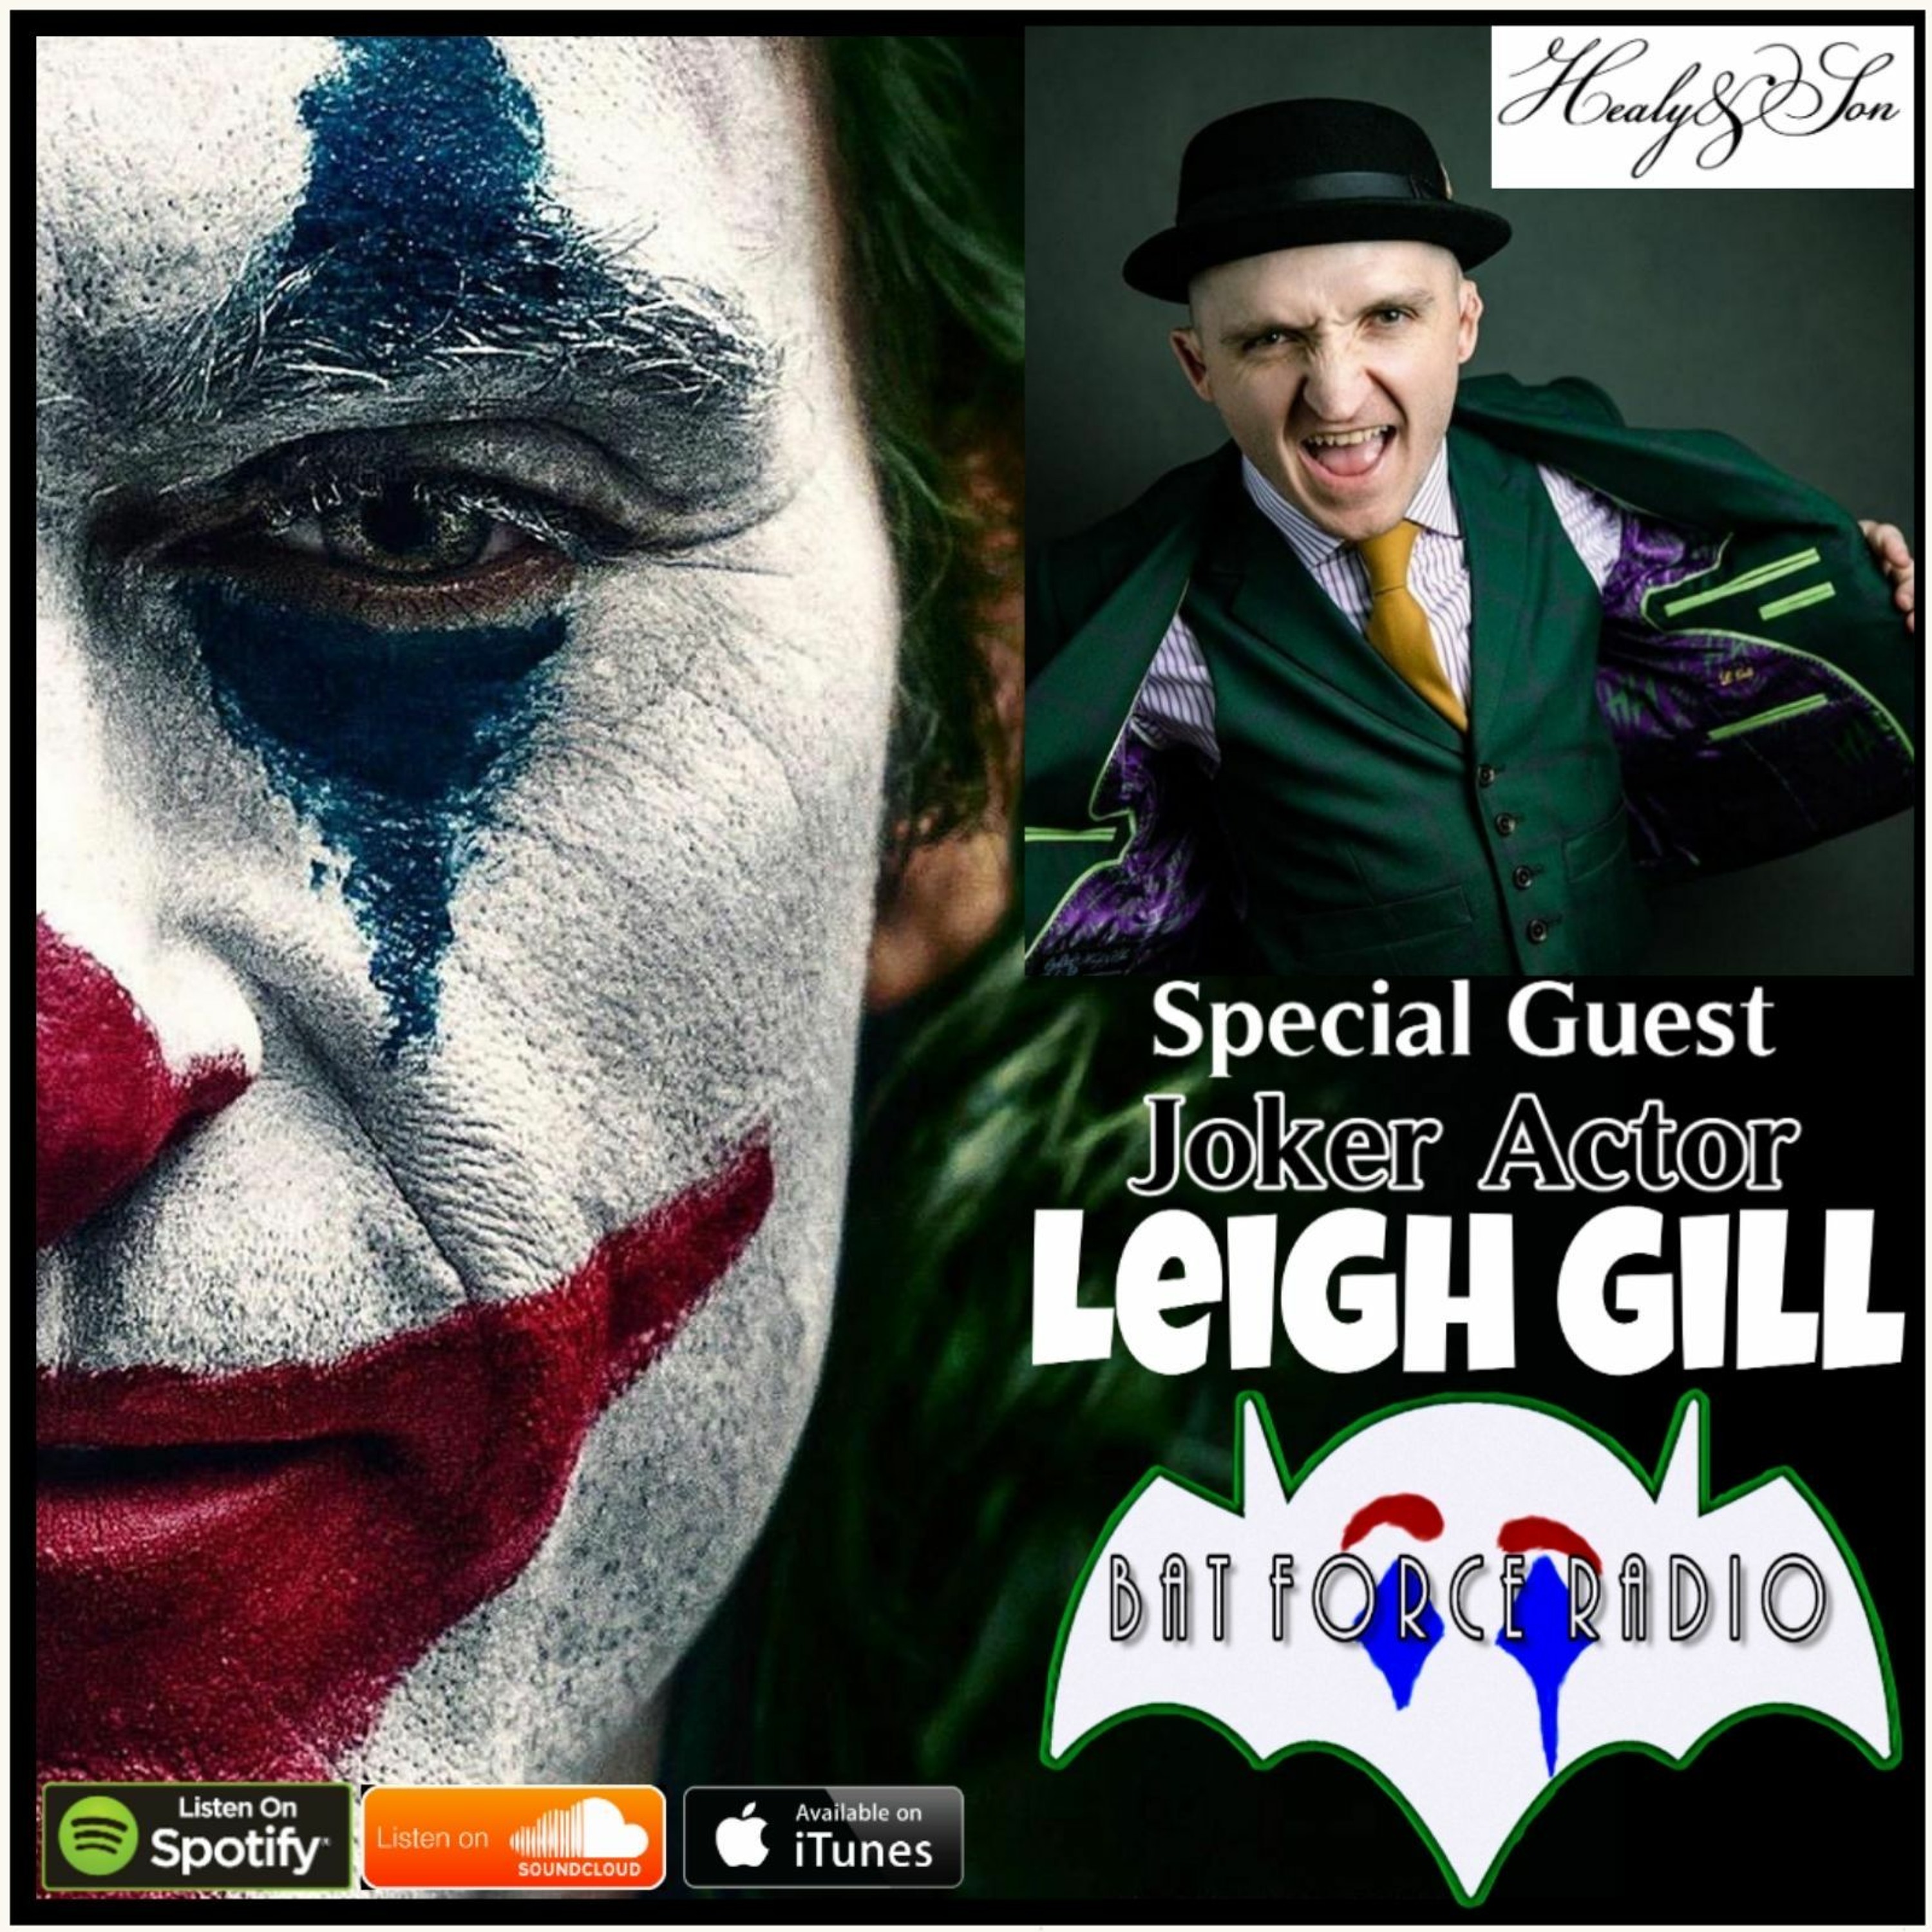 BatForceRadioEp209: Joker Movie Actor Leigh Gill and Healy & Son Tailoring!